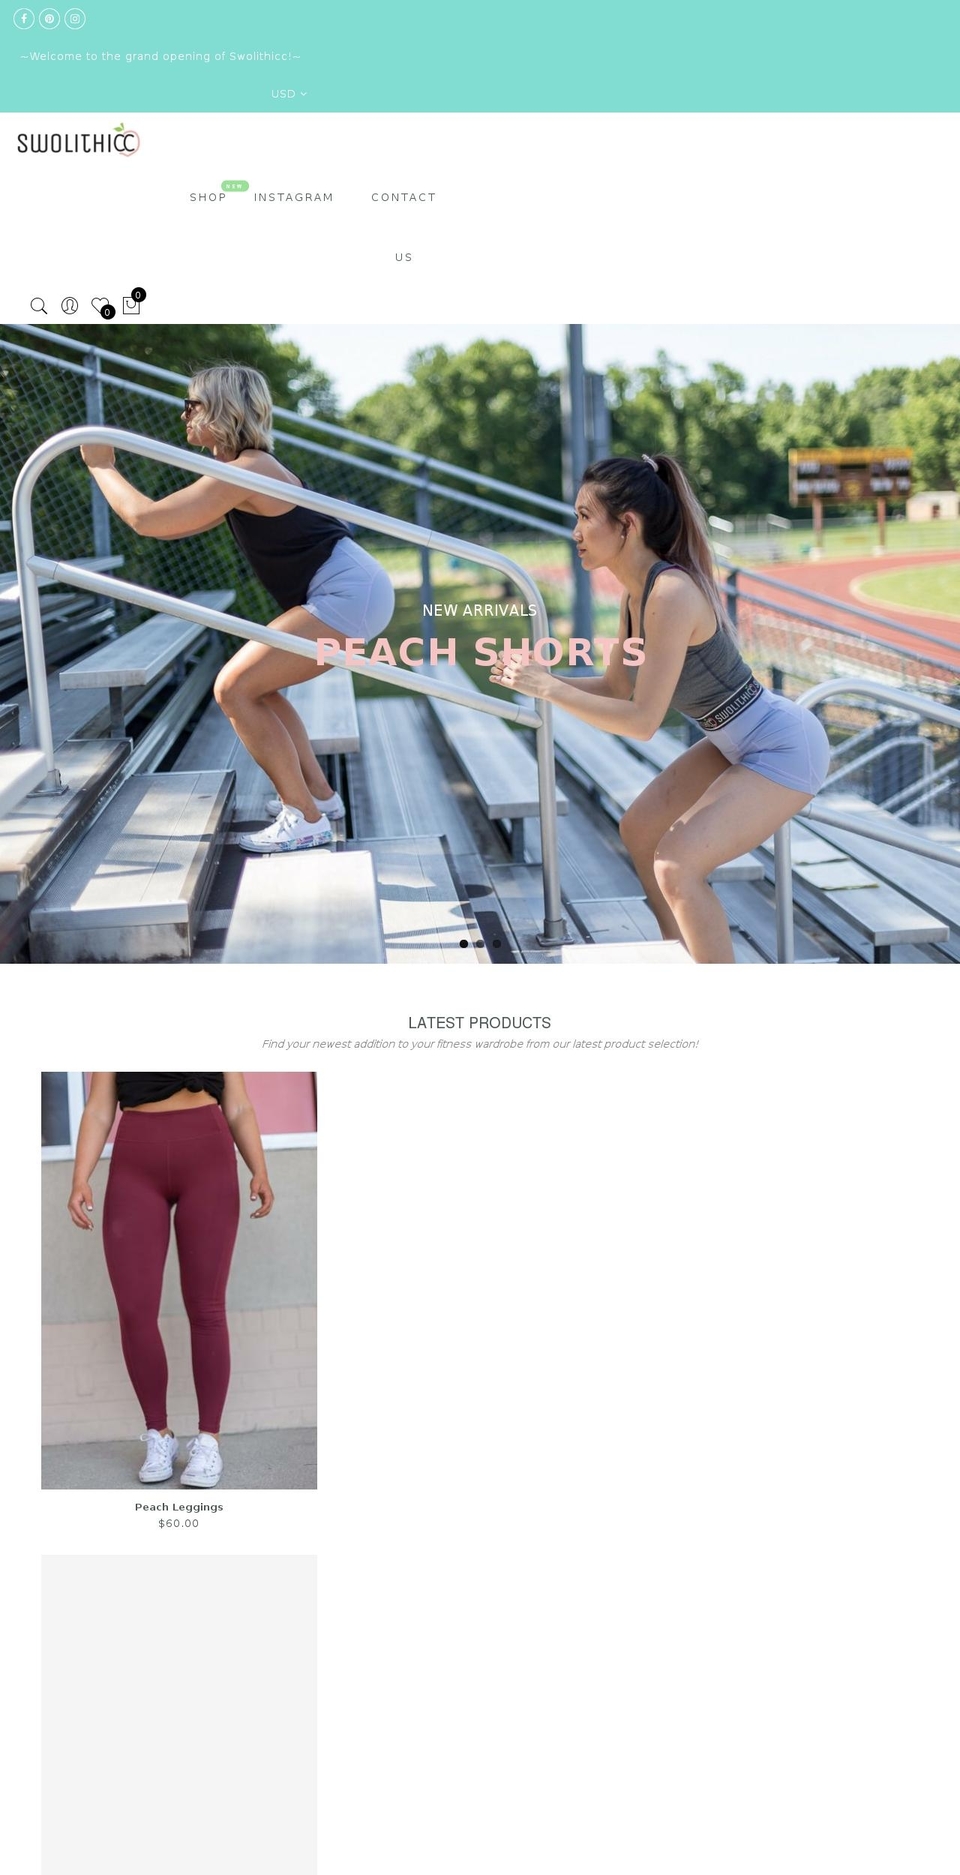 Gecko Shopify theme site example swolithiccathletics.com